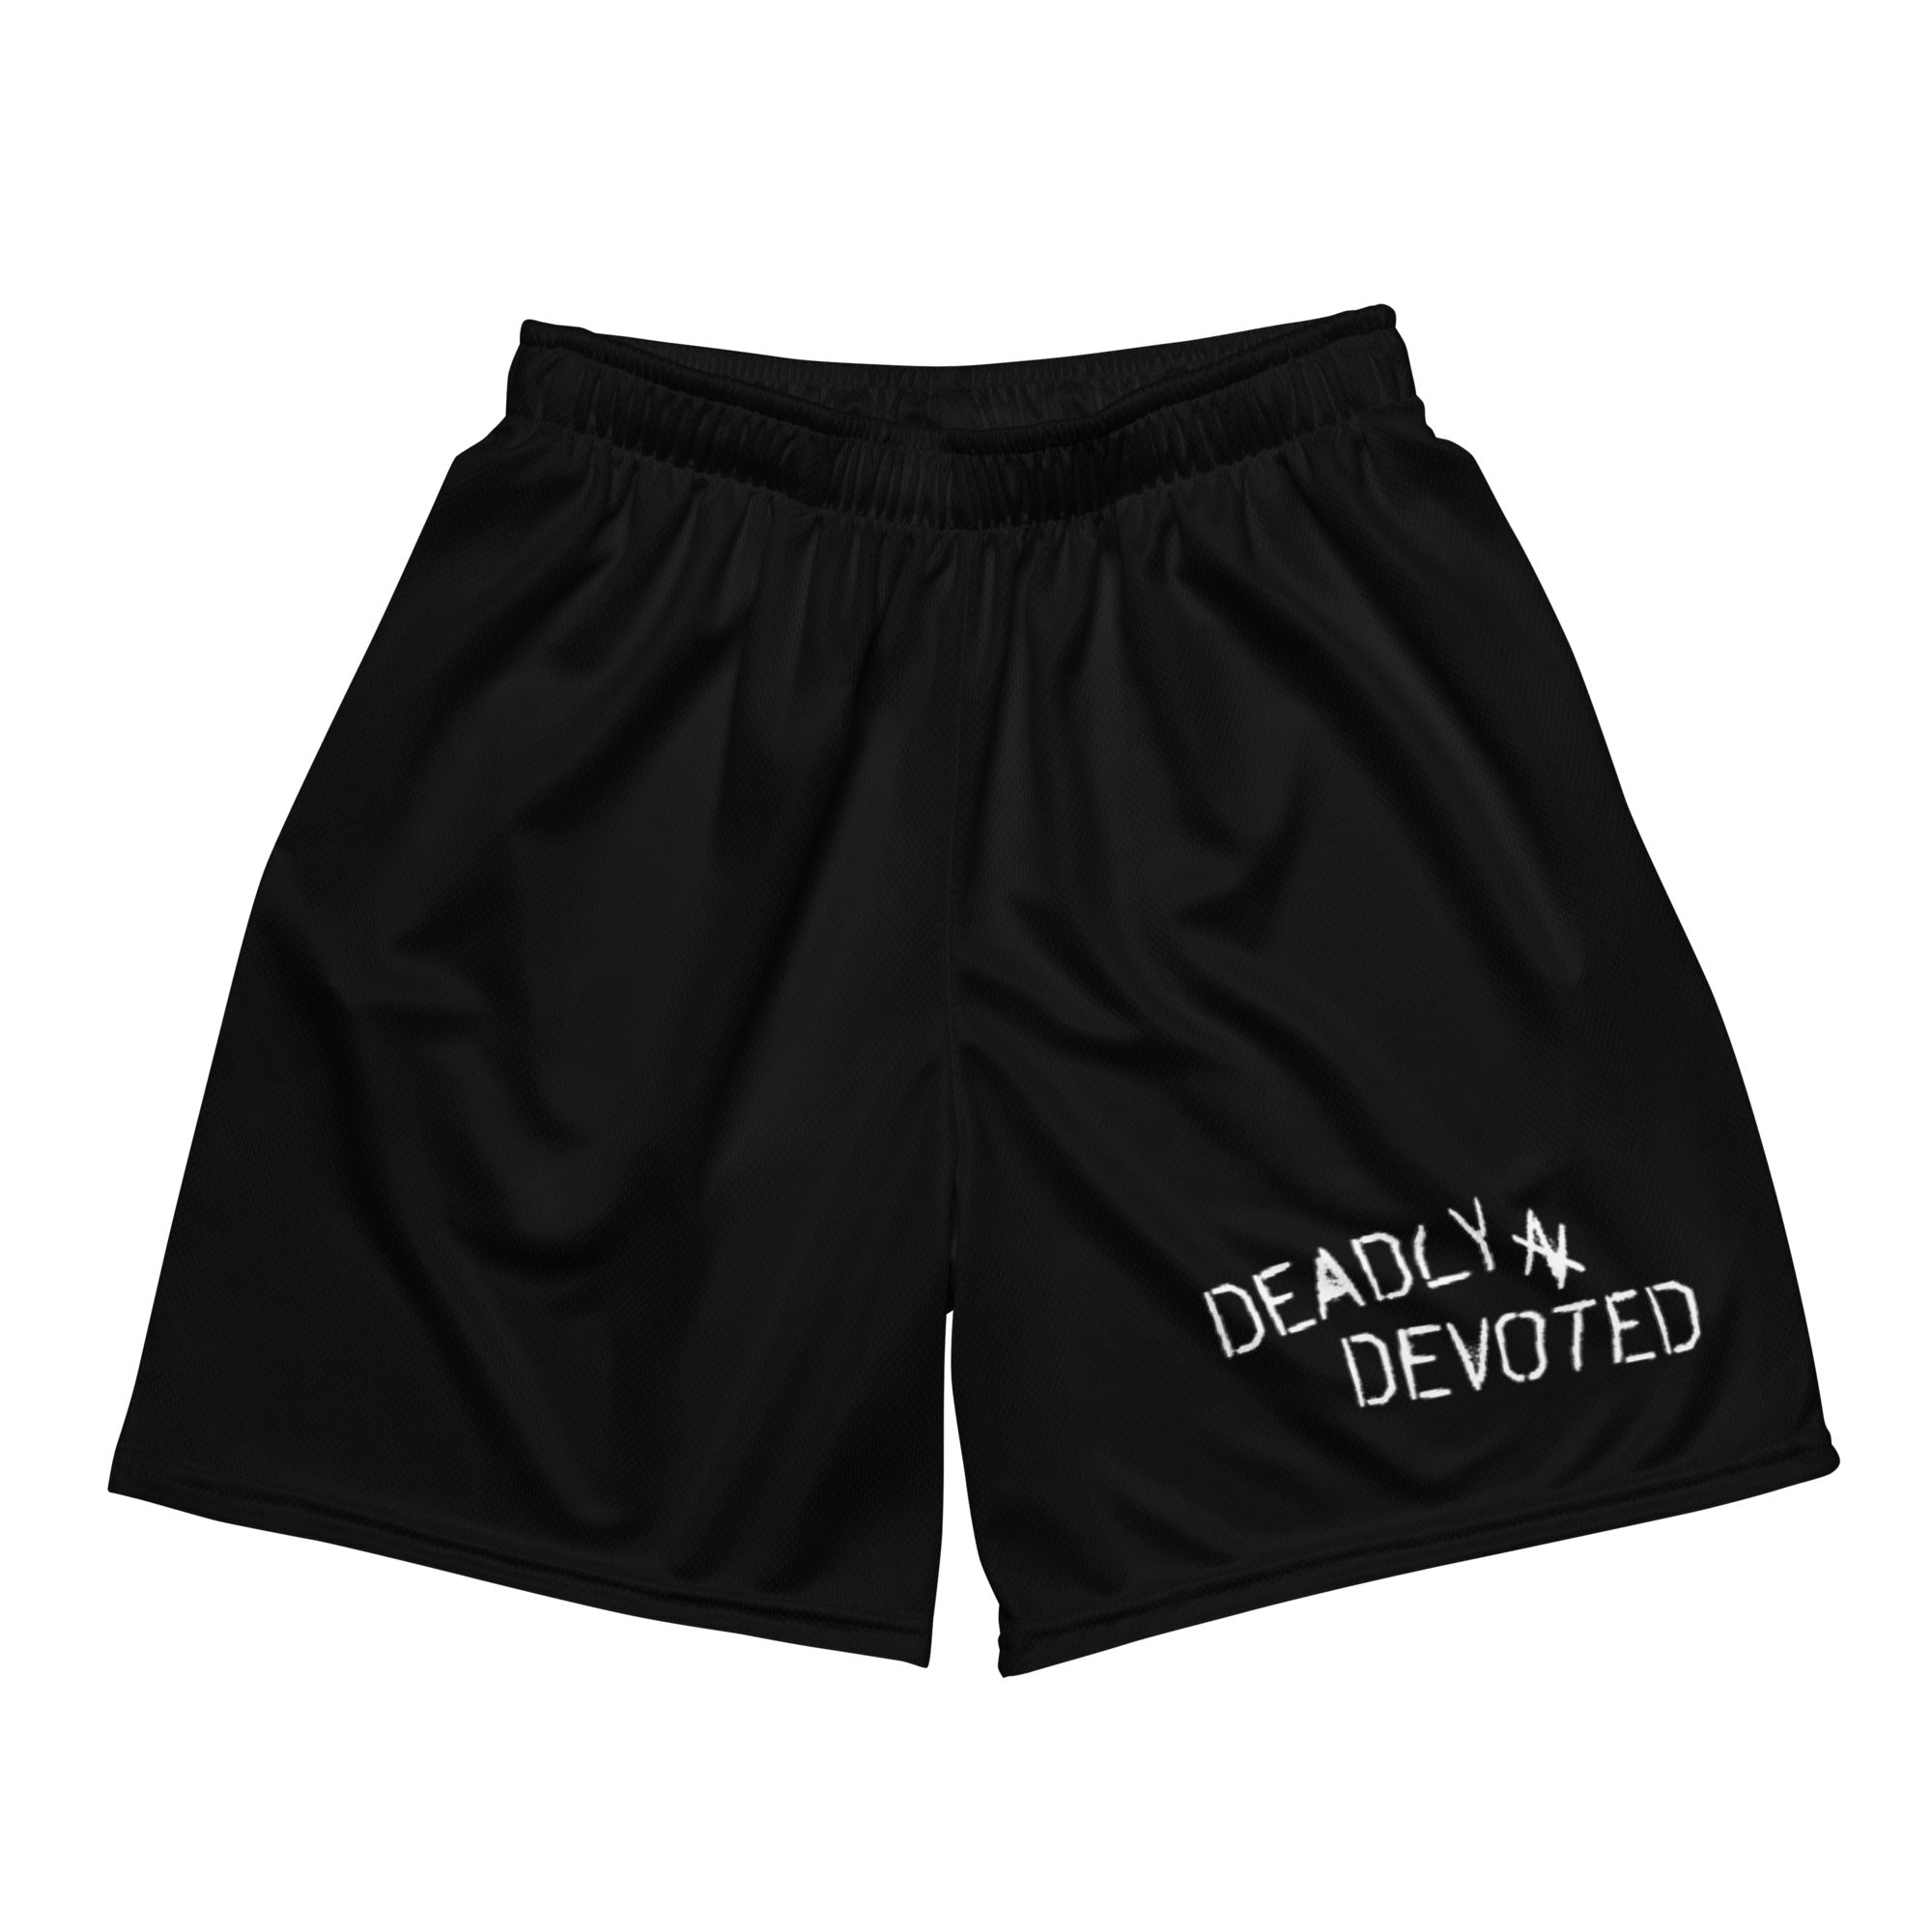 Deadly'N'Devoted mesh shorts